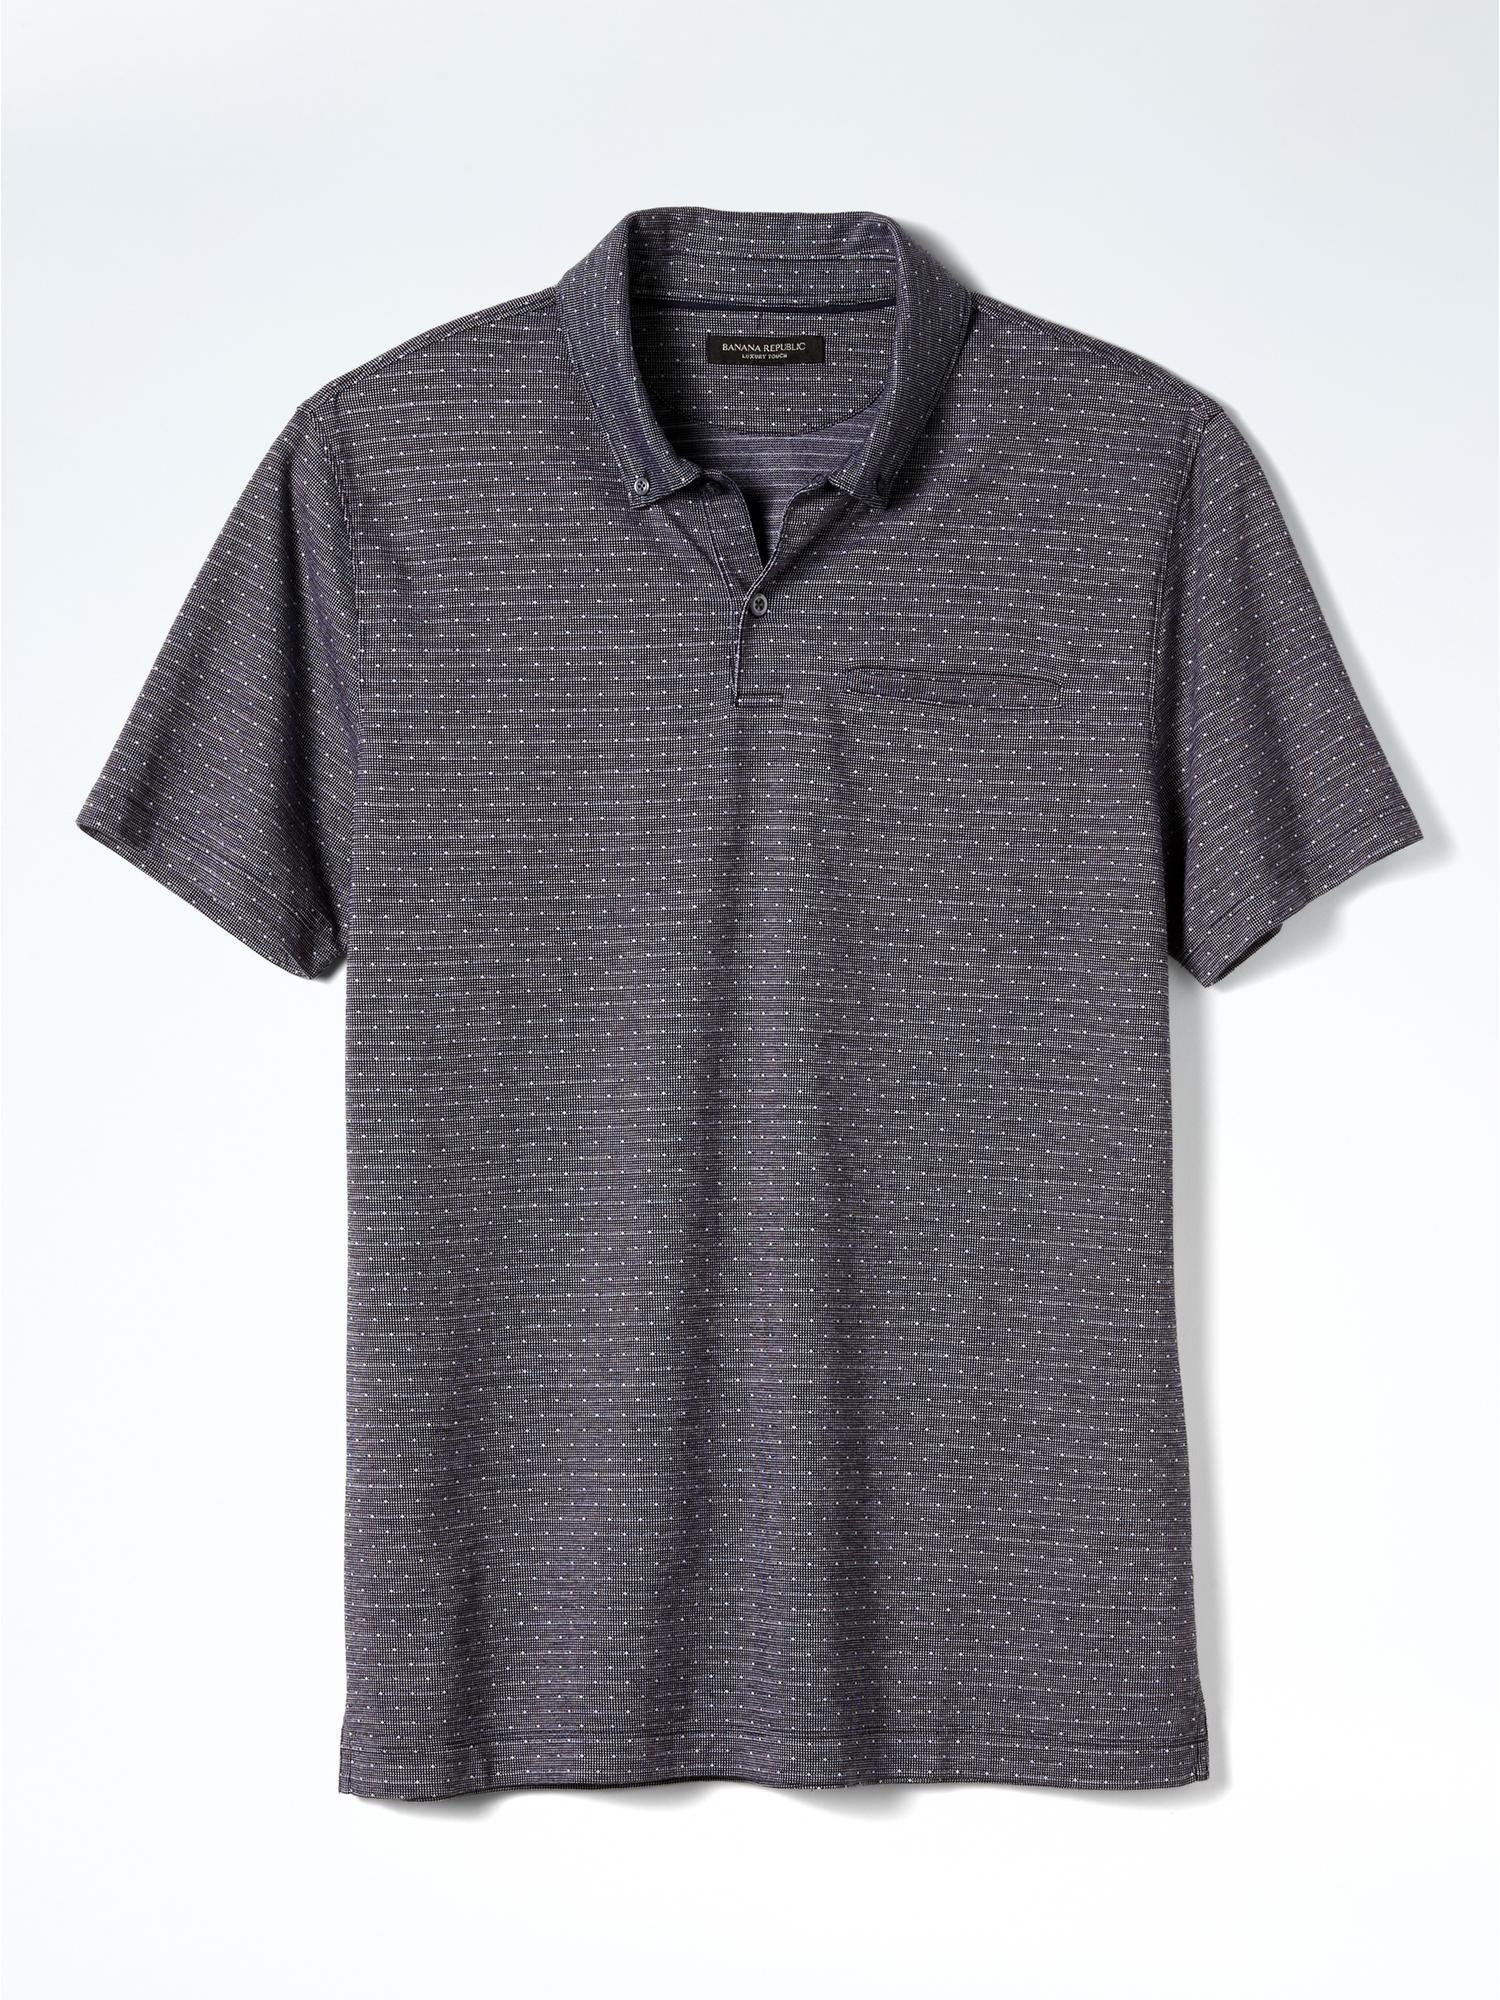 Luxury-Touch jakarlı  polo t-shirt product image